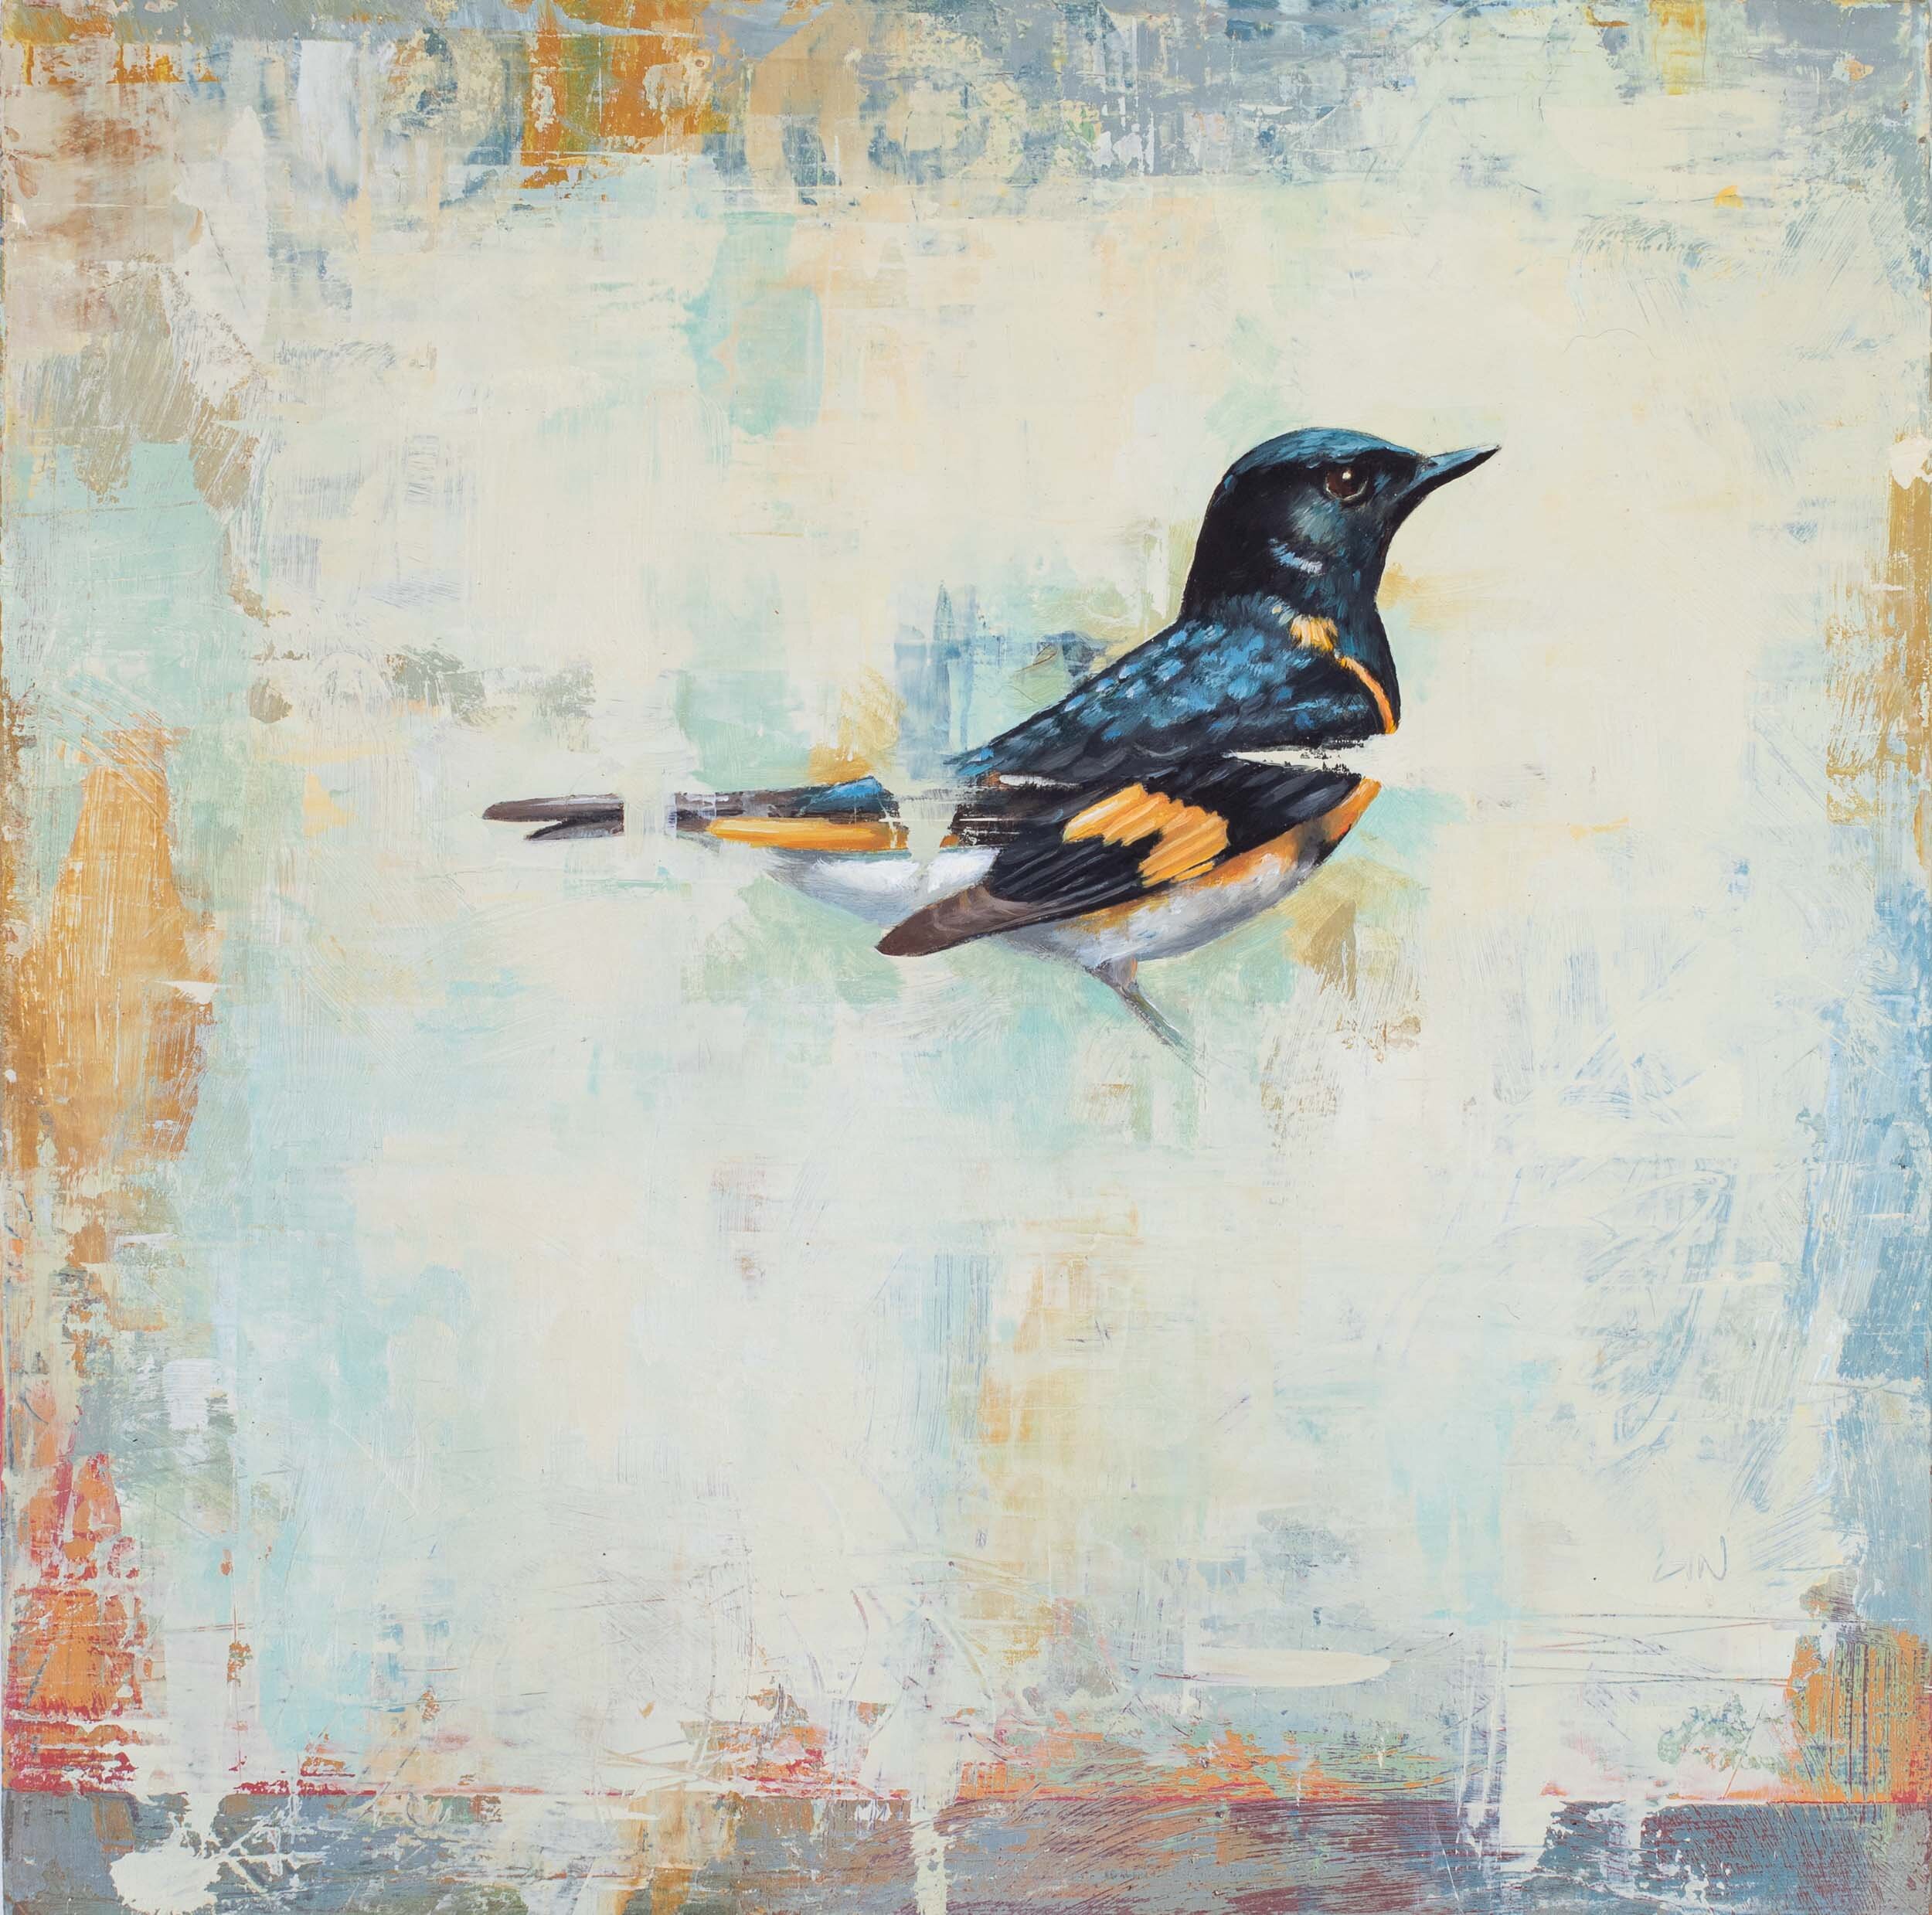   American Redstart  2020 oil on panel 10 x 10 inches  Private Collection 